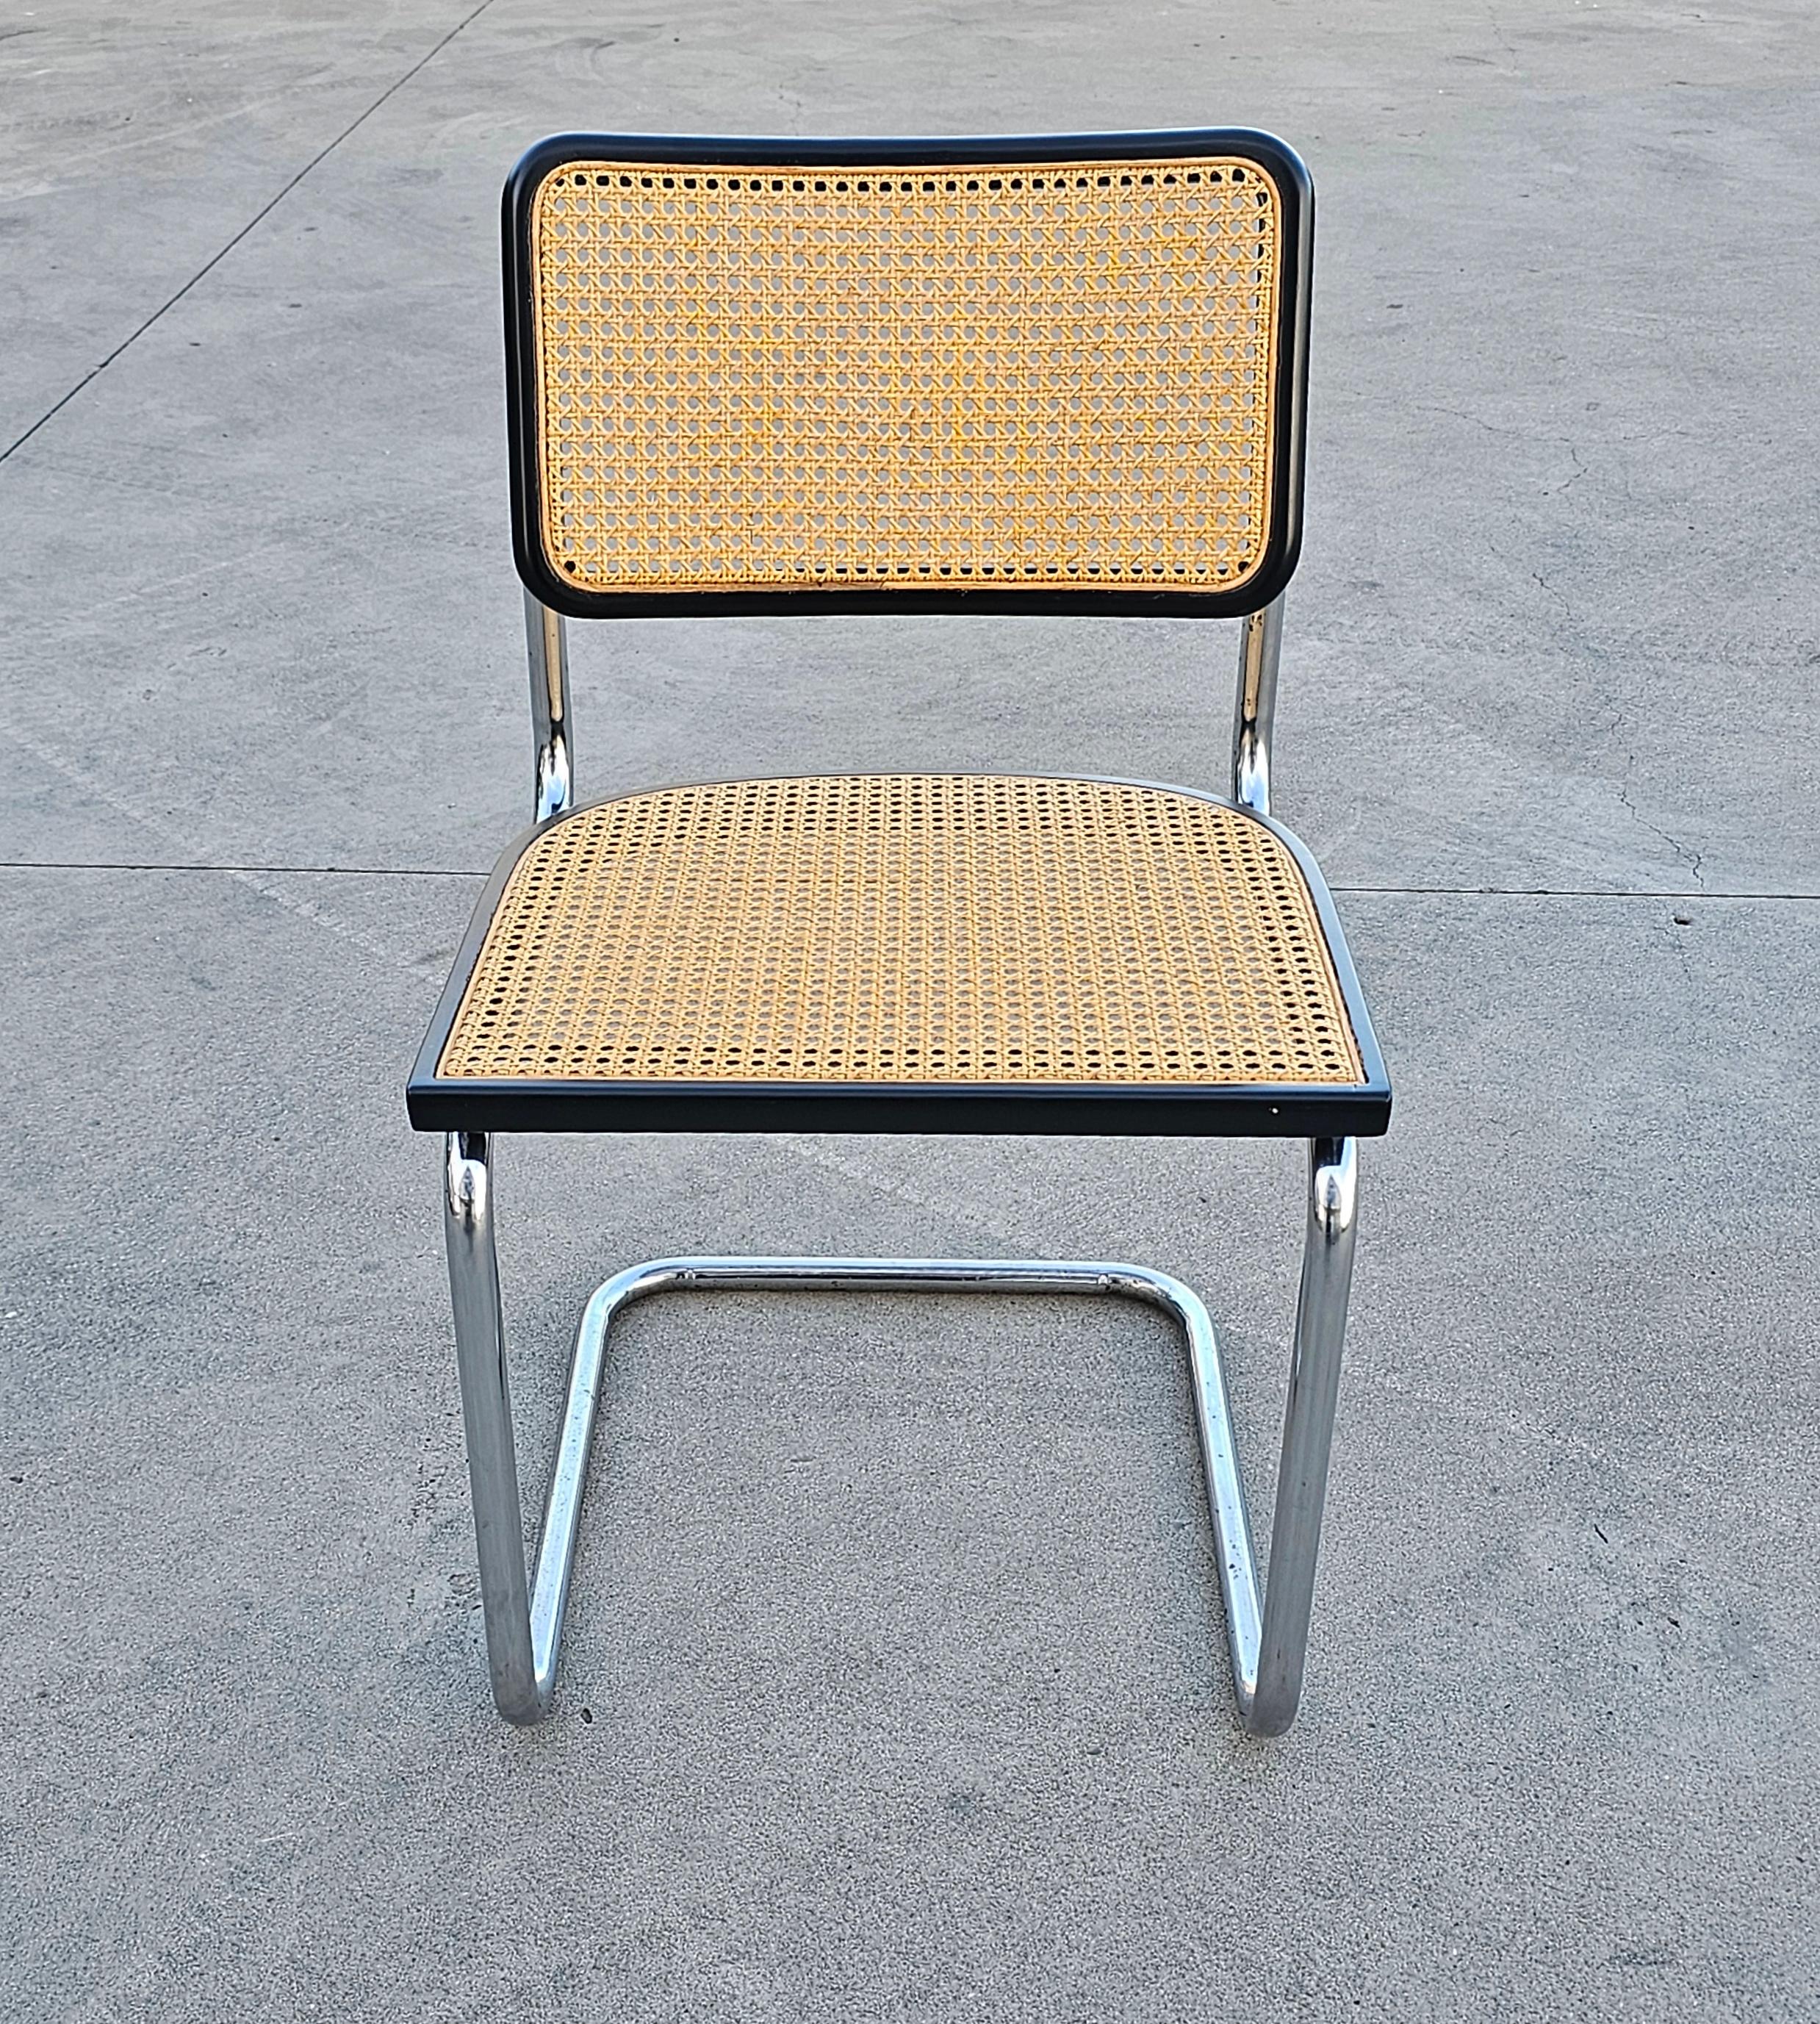 This listing features very well known chairs - Cesca Chair by Marcel Breuer. Manufacturing of the chairs is attr. to Gavina.

Marcel Breuer was an architect who worked in Bauahus School of architecture and design. He designed Cesca chair in 1928 for